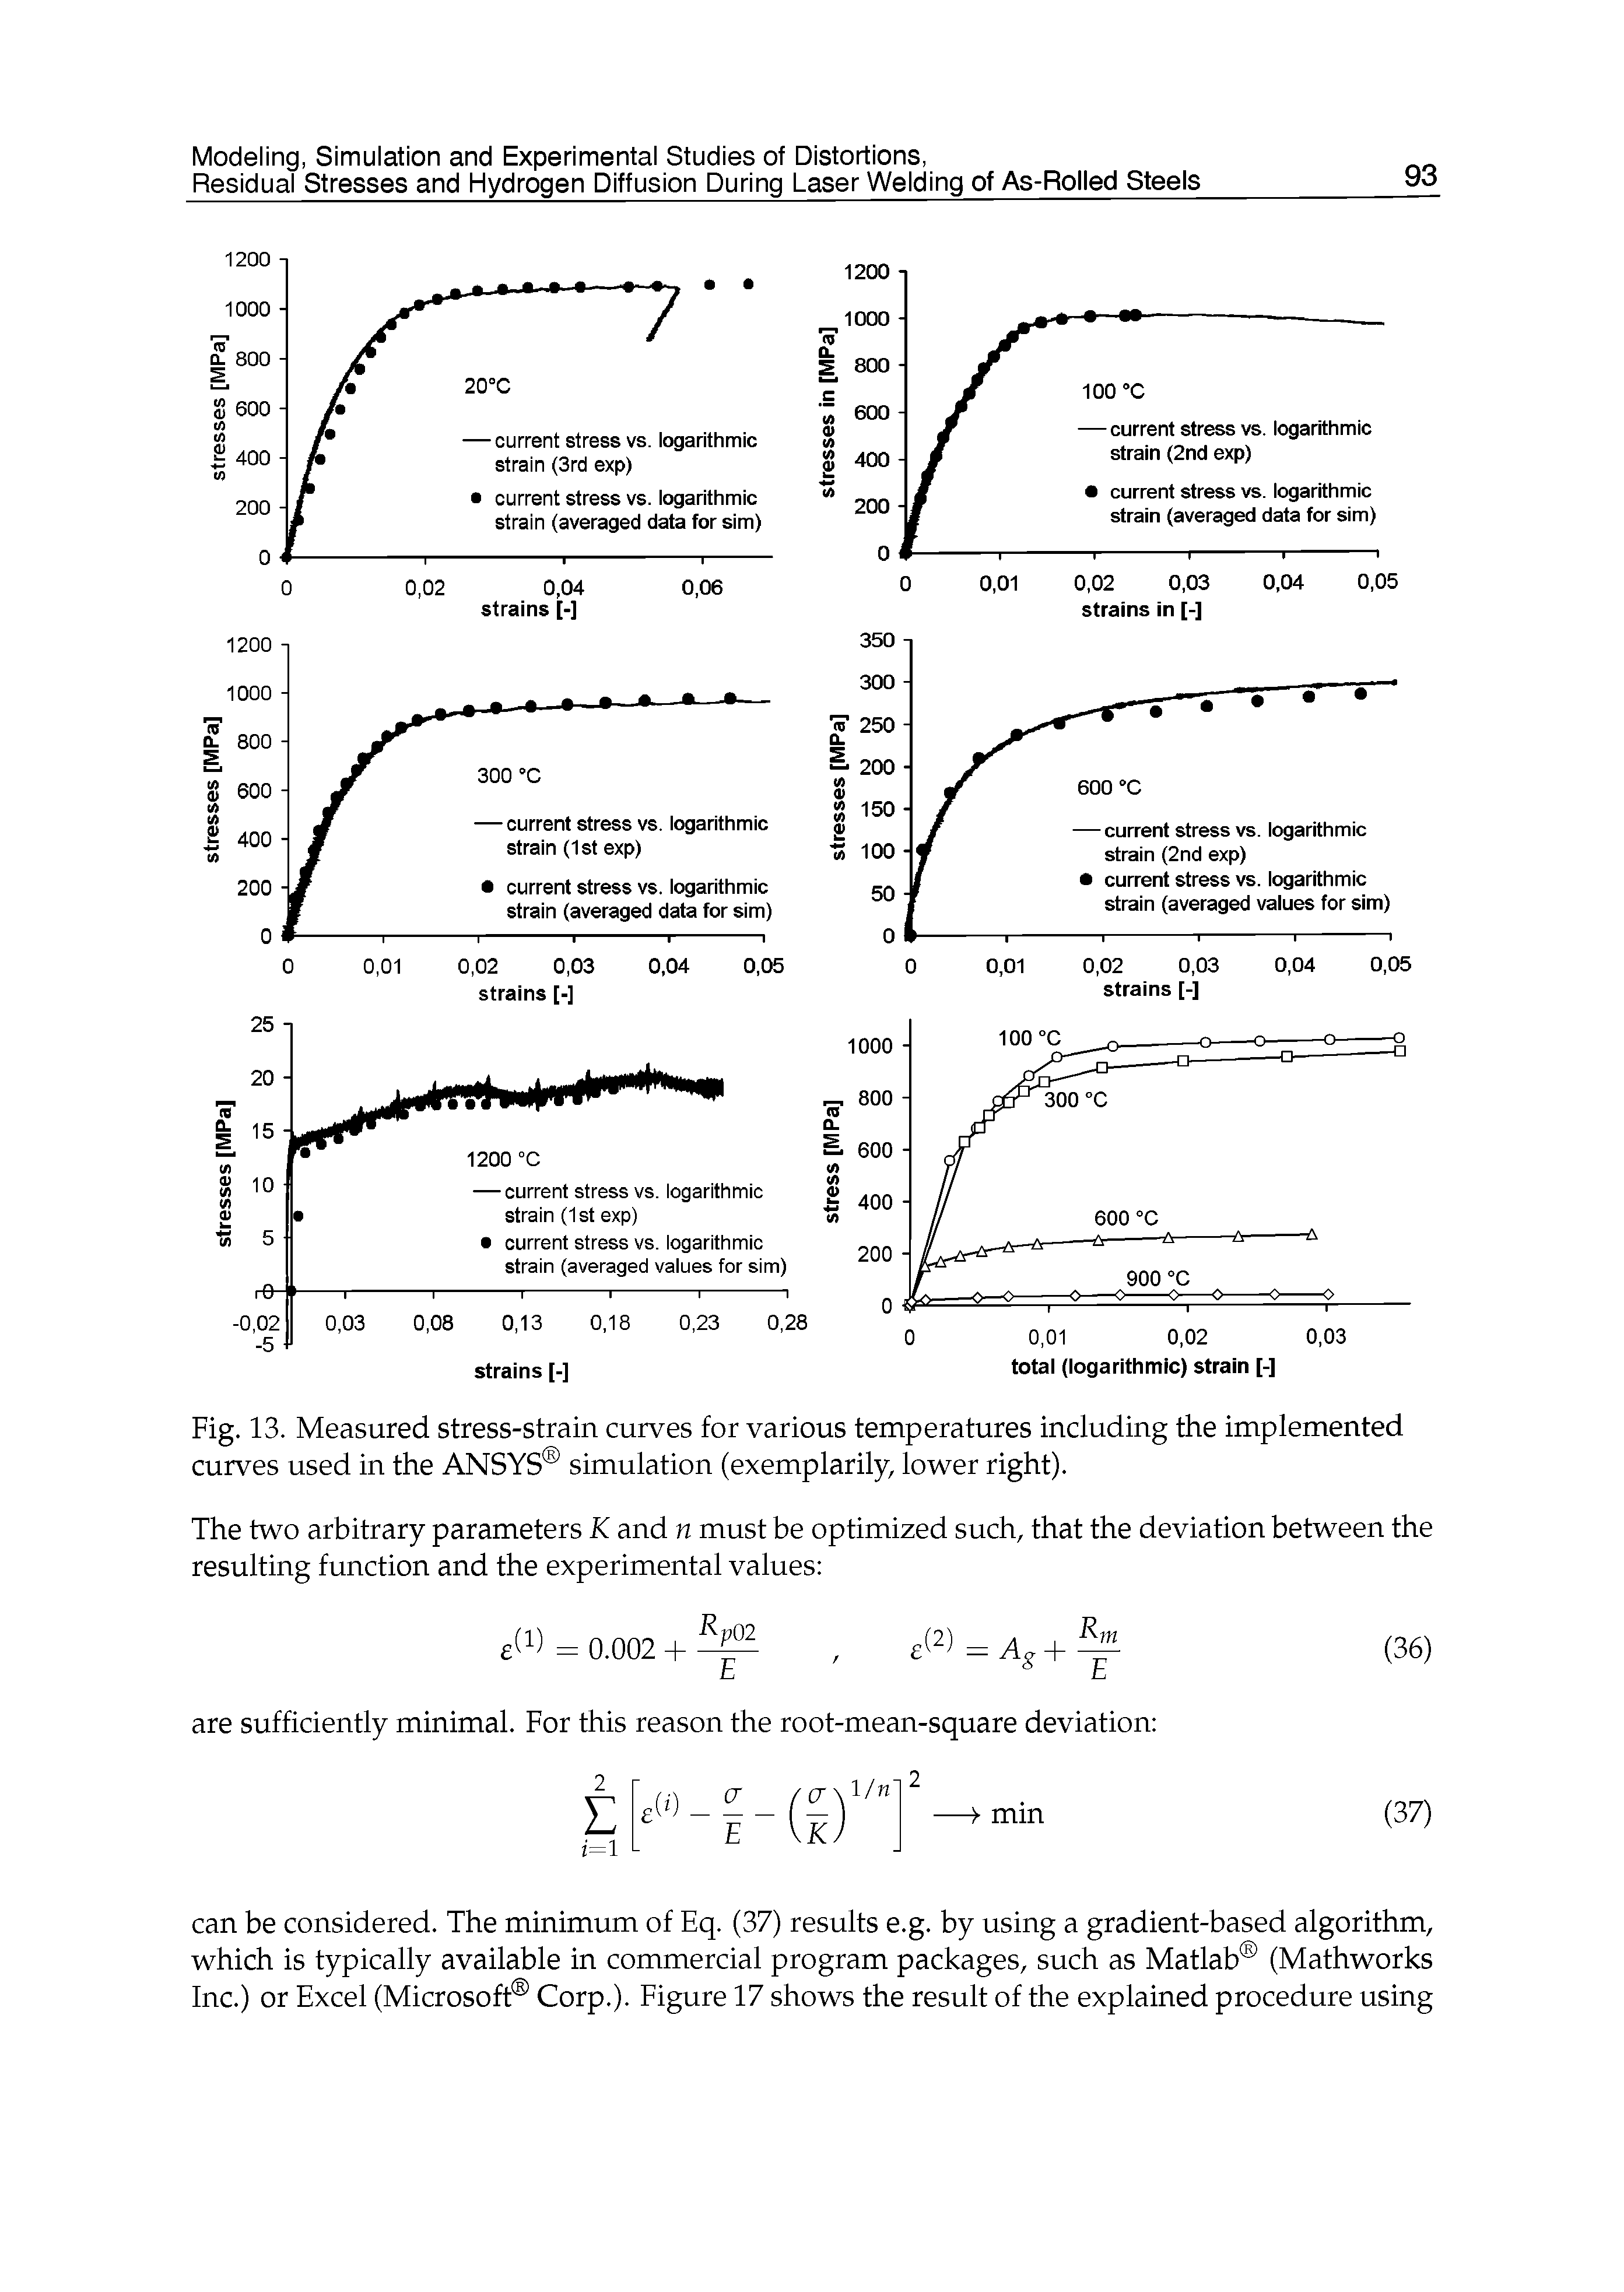 Fig. 13. Measured stress-strain curves for various temperatures including the implemented curves used in the ANSYS simulation (exemplarily, lower right).